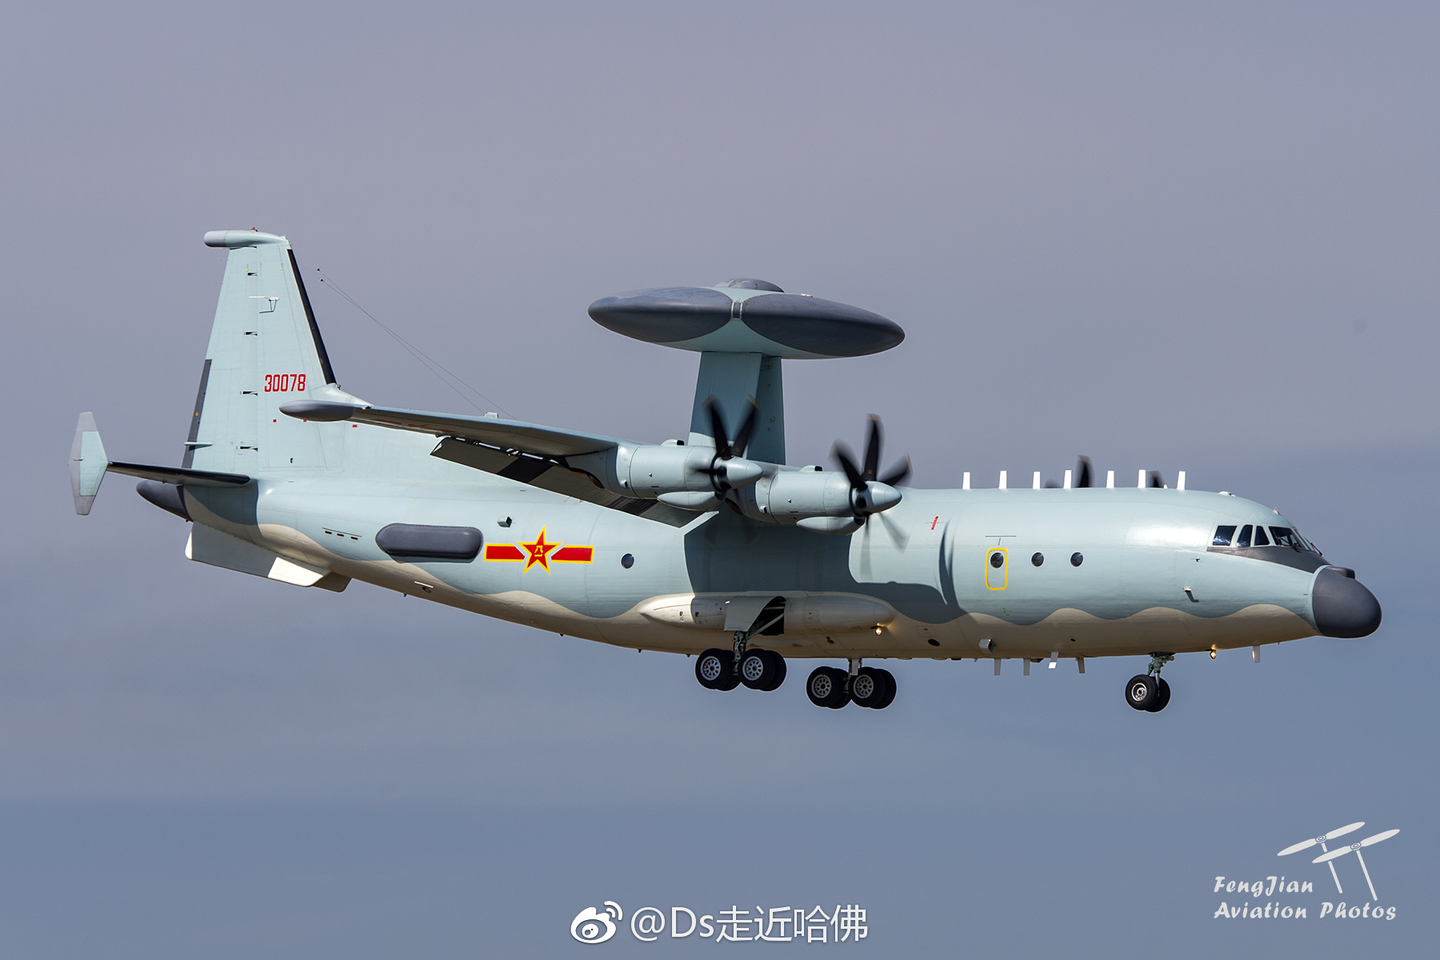 A PLAAF KJ-500 arrives at Zhuhai to take part in the Airshow China exhibition. <em>FengJian Aviation Photos/via Chinese internet</em>